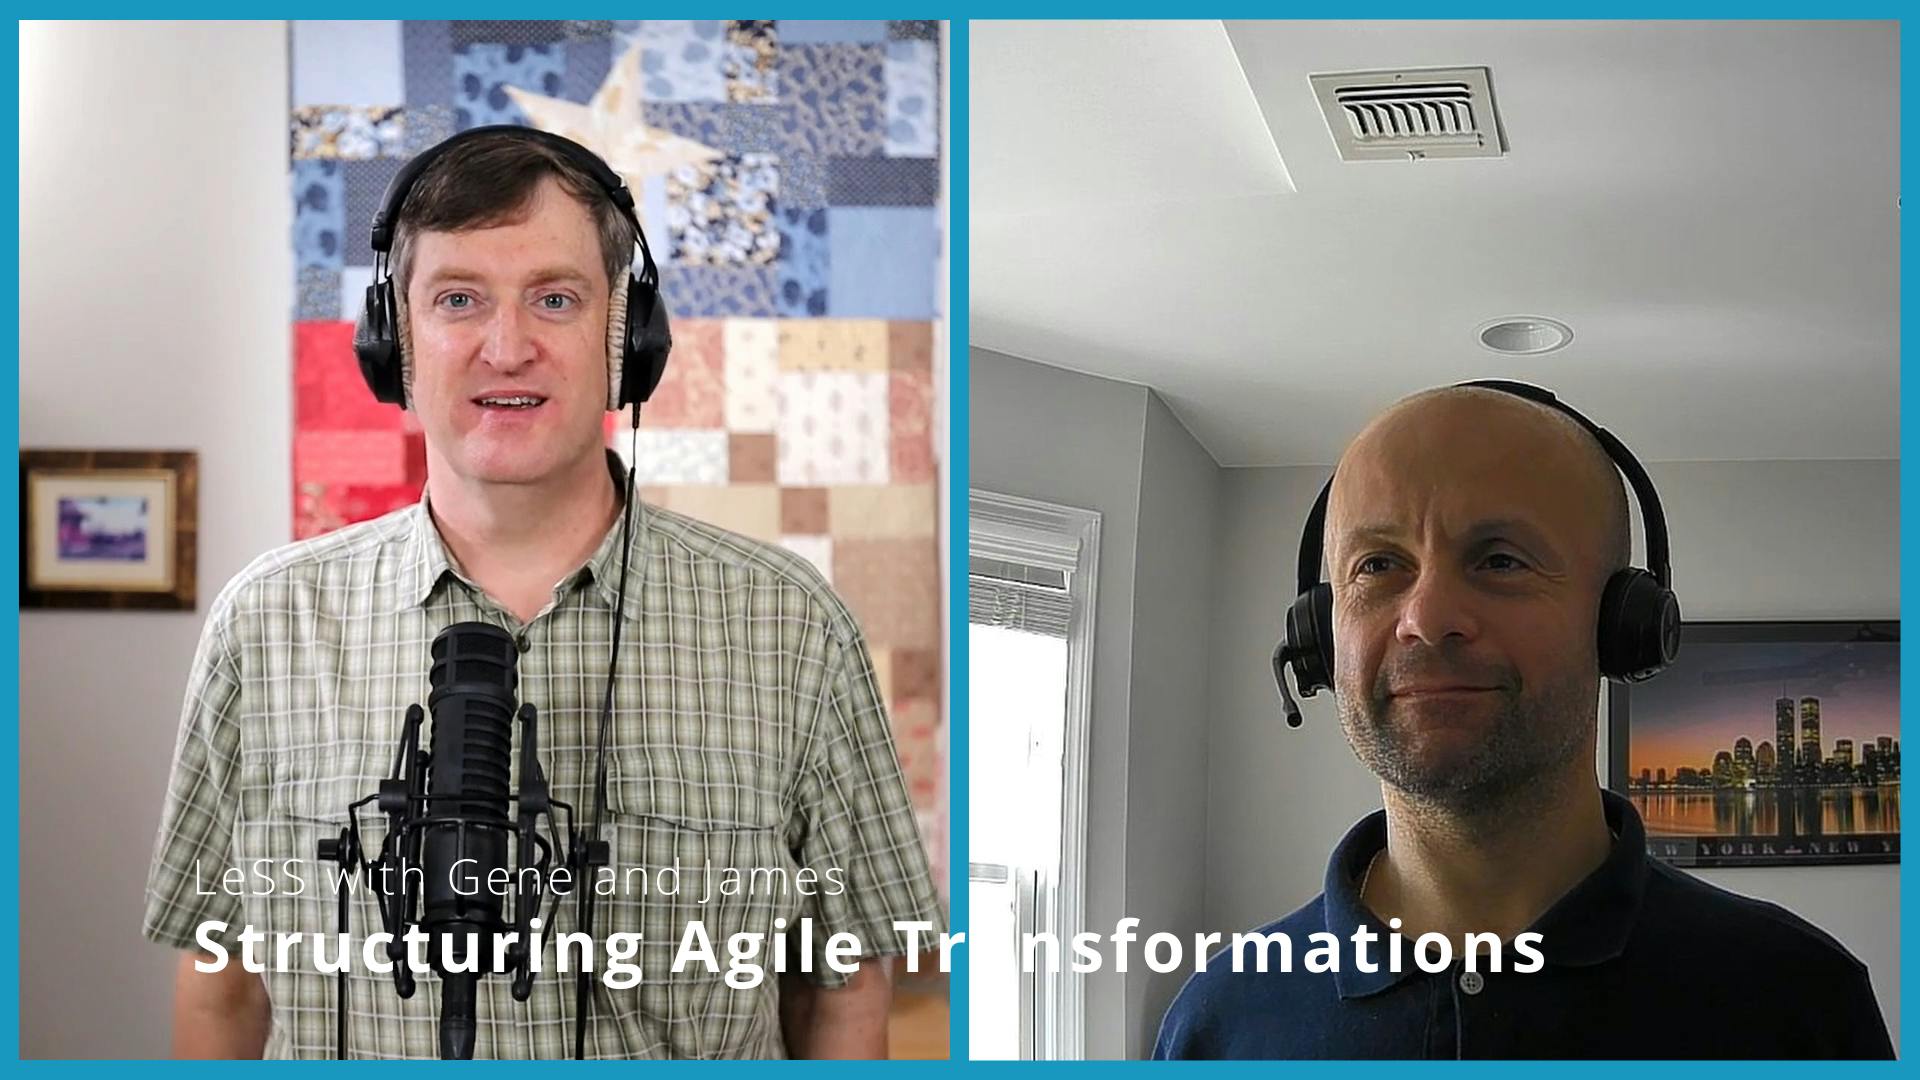 Structuring Agile Transformations still